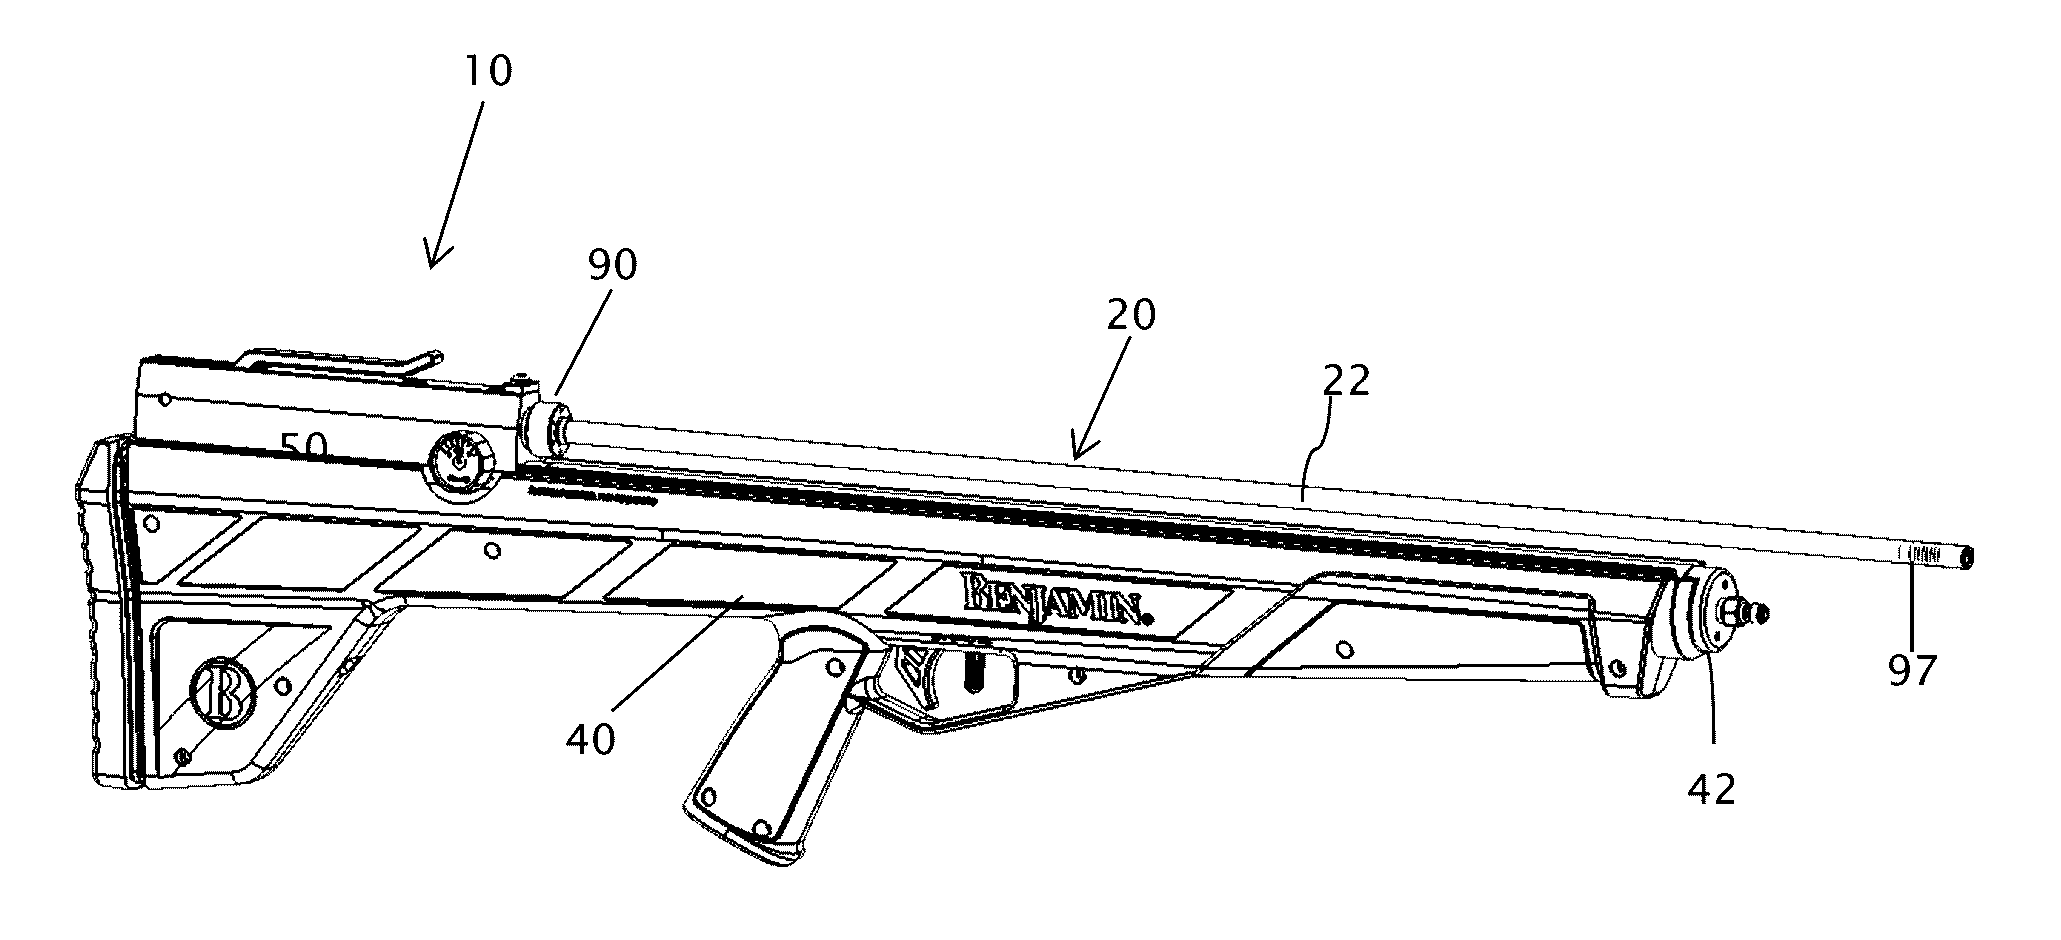 Arrow gun with controlled retention force and barrel vibration damping